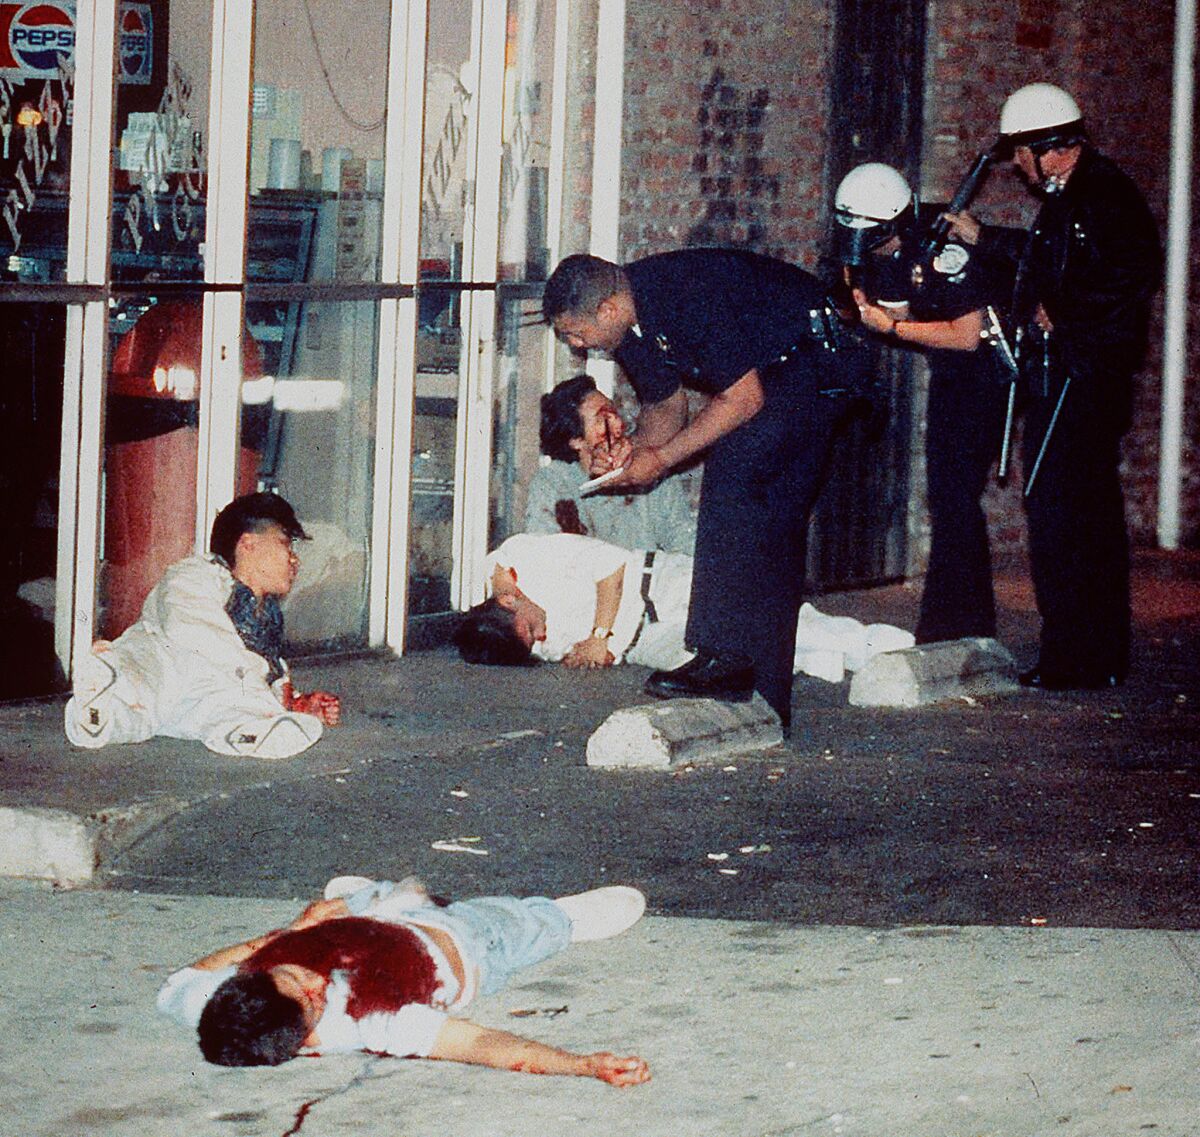 Edward Song Lee, 18, foreground, was shot to death and three other Koreans were injured in an exchange of gunfire with looters at 3rd Street and Hobart Boulevard in Koreatown on April 30, 1992. Police questioned the survivors of the attack who were shot while trying to protect a Korean-owned pizza parlor. (Hyungwon Kang / Los Angeles Times)